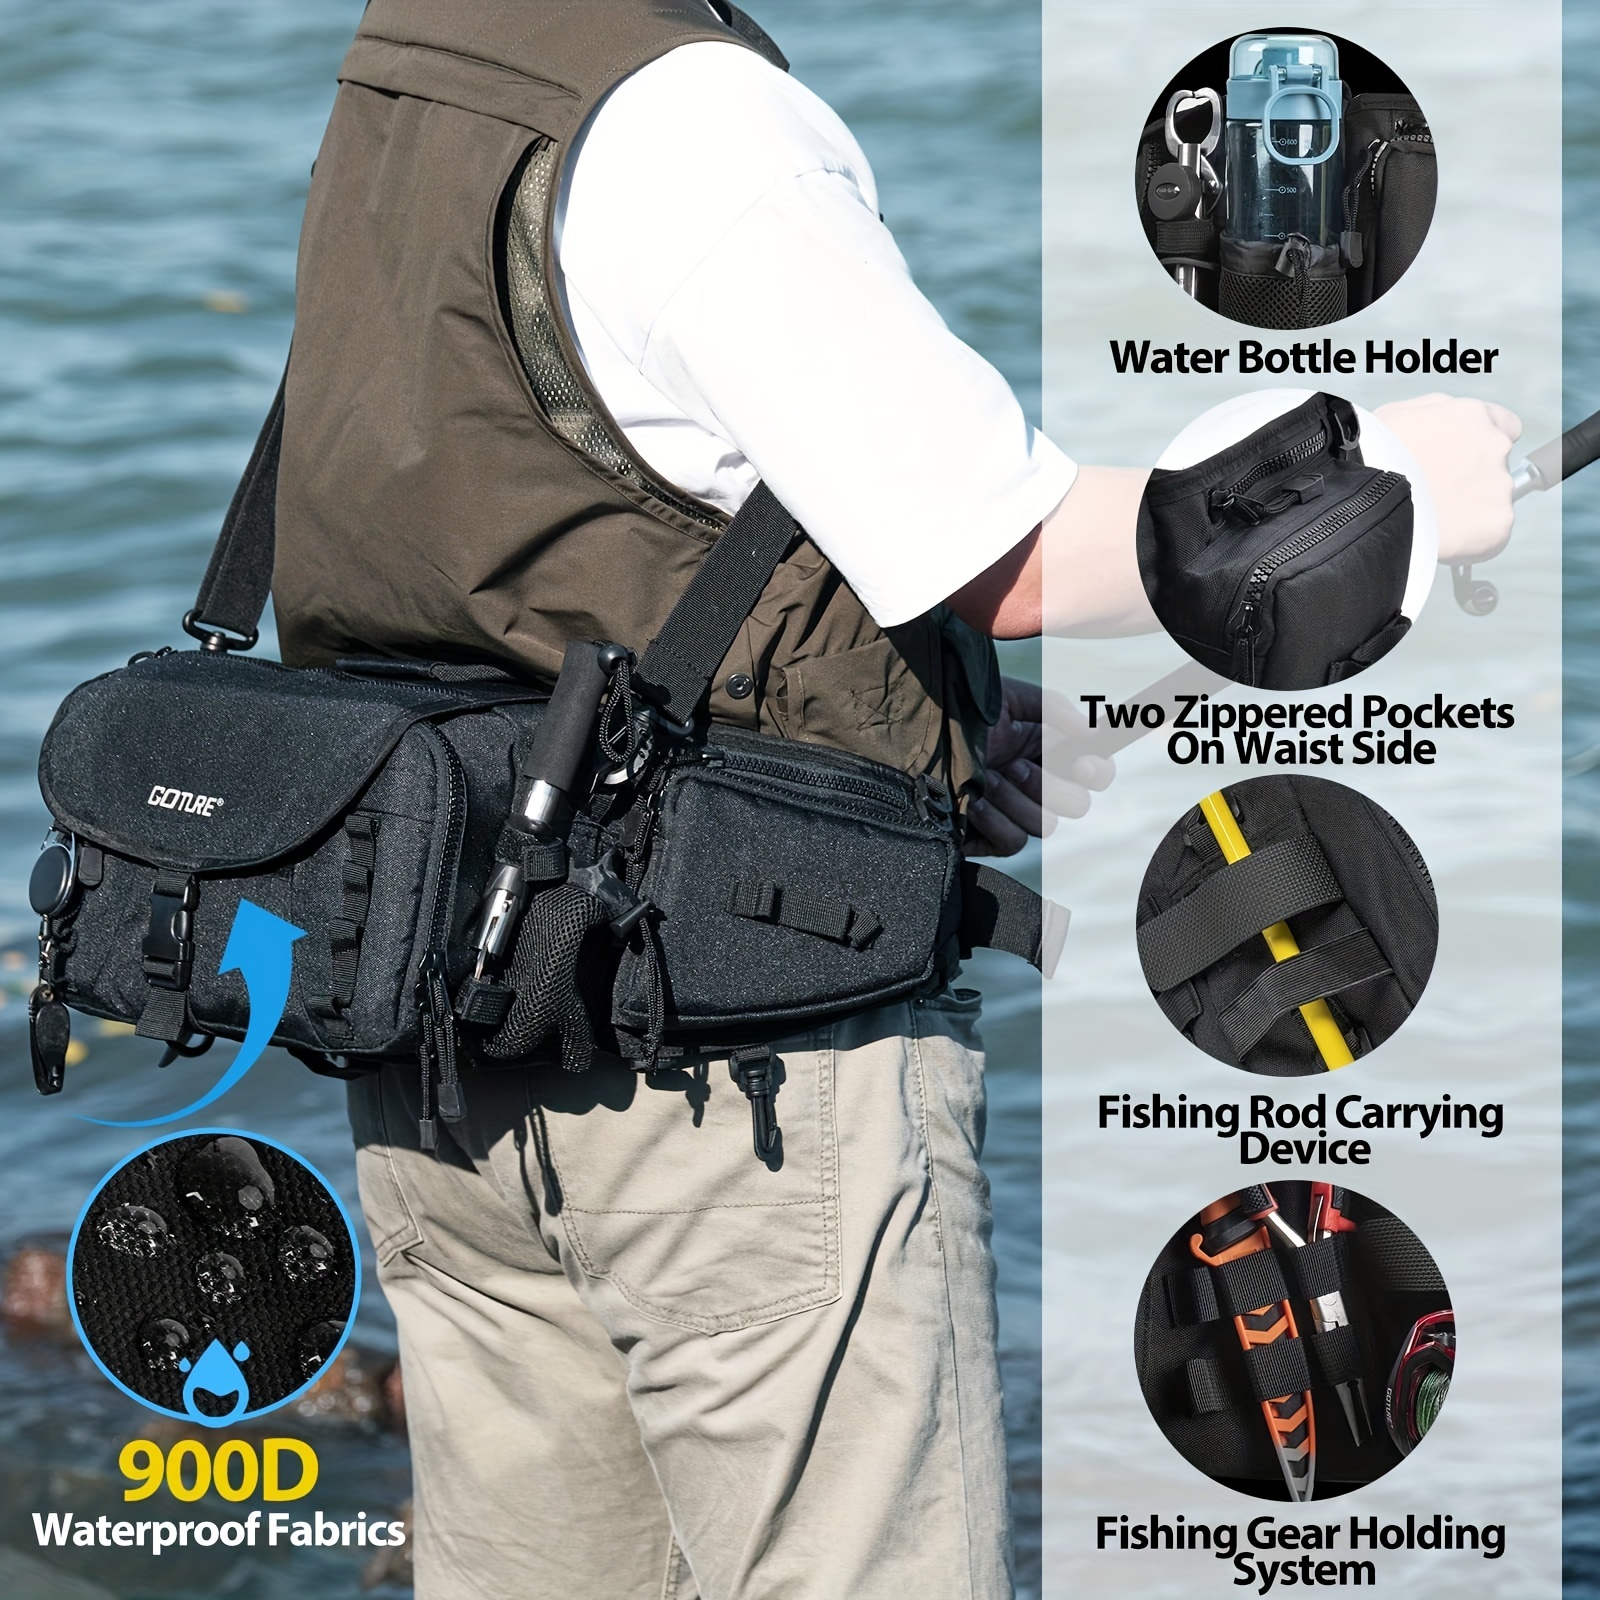 Fishing Tackle Tackle Backpack With Reel And Lures Storage, Waist